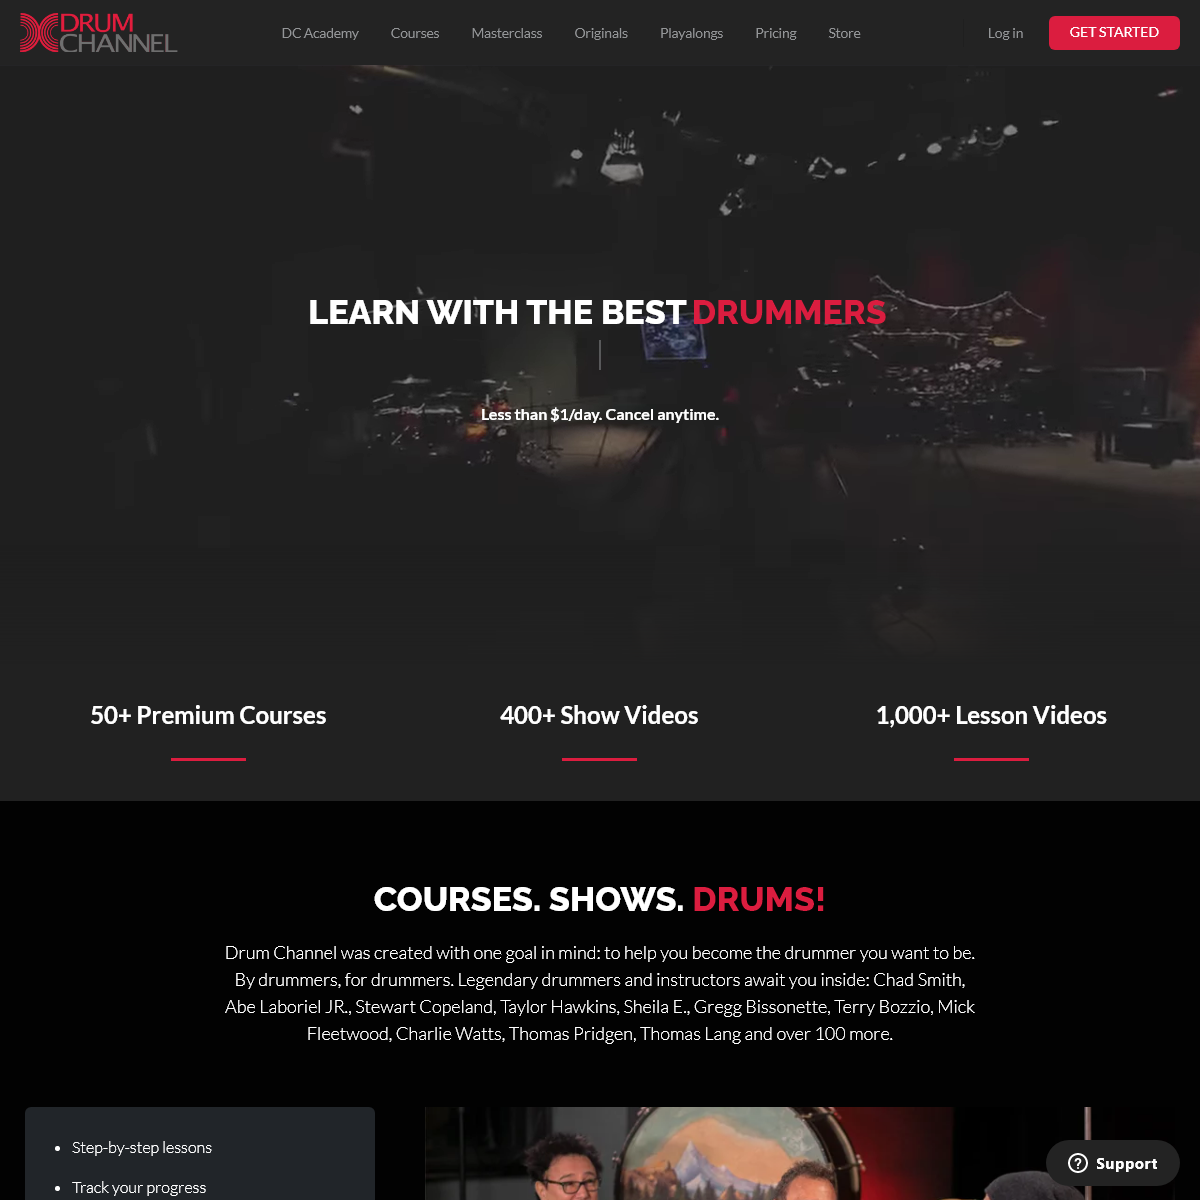 A complete backup of drumchannel.com